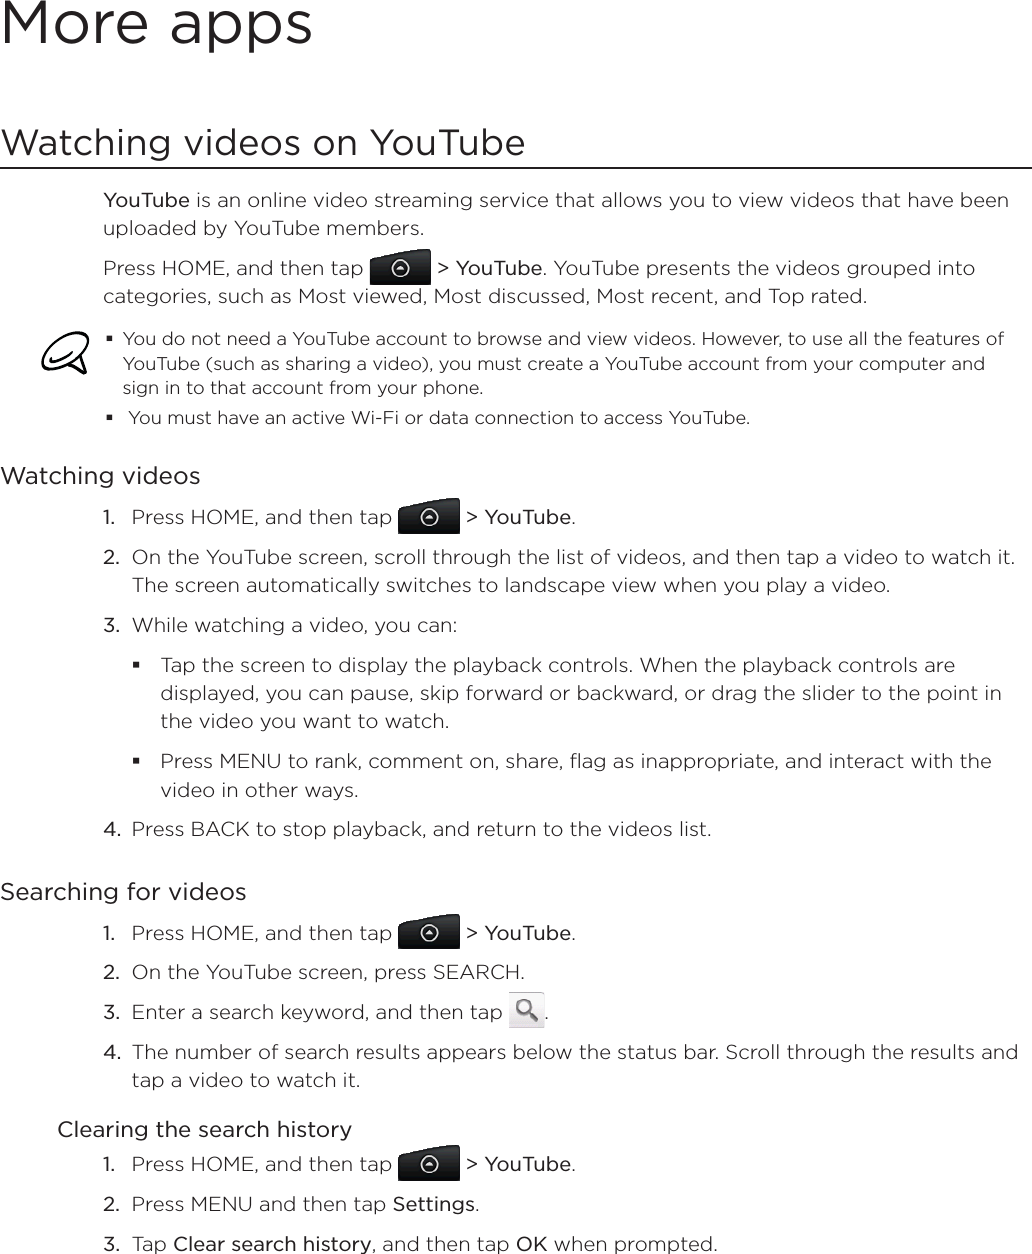 More appsWatching videos on YouTubeYouTube is an online video streaming service that allows you to view videos that have been uploaded by YouTube members.Press HOME, and then tap   &gt; YouTube. YouTube presents the videos grouped into categories, such as Most viewed, Most discussed, Most recent, and Top rated.You do not need a YouTube account to browse and view videos. However, to use all the features of YouTube (such as sharing a video), you must create a YouTube account from your computer and sign in to that account from your phone. You must have an active Wi-Fi or data connection to access YouTube.Watching videosPress HOME, and then tap   &gt; YouTube.On the YouTube screen, scroll through the list of videos, and then tap a video to watch it. The screen automatically switches to landscape view when you play a video.While watching a video, you can: Tap the screen to display the playback controls. When the playback controls are displayed, you can pause, skip forward or backward, or drag the slider to the point in the video you want to watch.Press MENU to rank, comment on, share, flag as inappropriate, and interact with the video in other ways.4. Press BACK to stop playback, and return to the videos list.Searching for videosPress HOME, and then tap   &gt; YouTube.On the YouTube screen, press SEARCH.Enter a search keyword, and then tap  .The number of search results appears below the status bar. Scroll through the results and tap a video to watch it.Clearing the search historyPress HOME, and then tap   &gt; YouTube.Press MENU and then tap Settings.Tap Clear search history, and then tap OK when prompted.1.2.3.1.2.3.4.1.2.3.